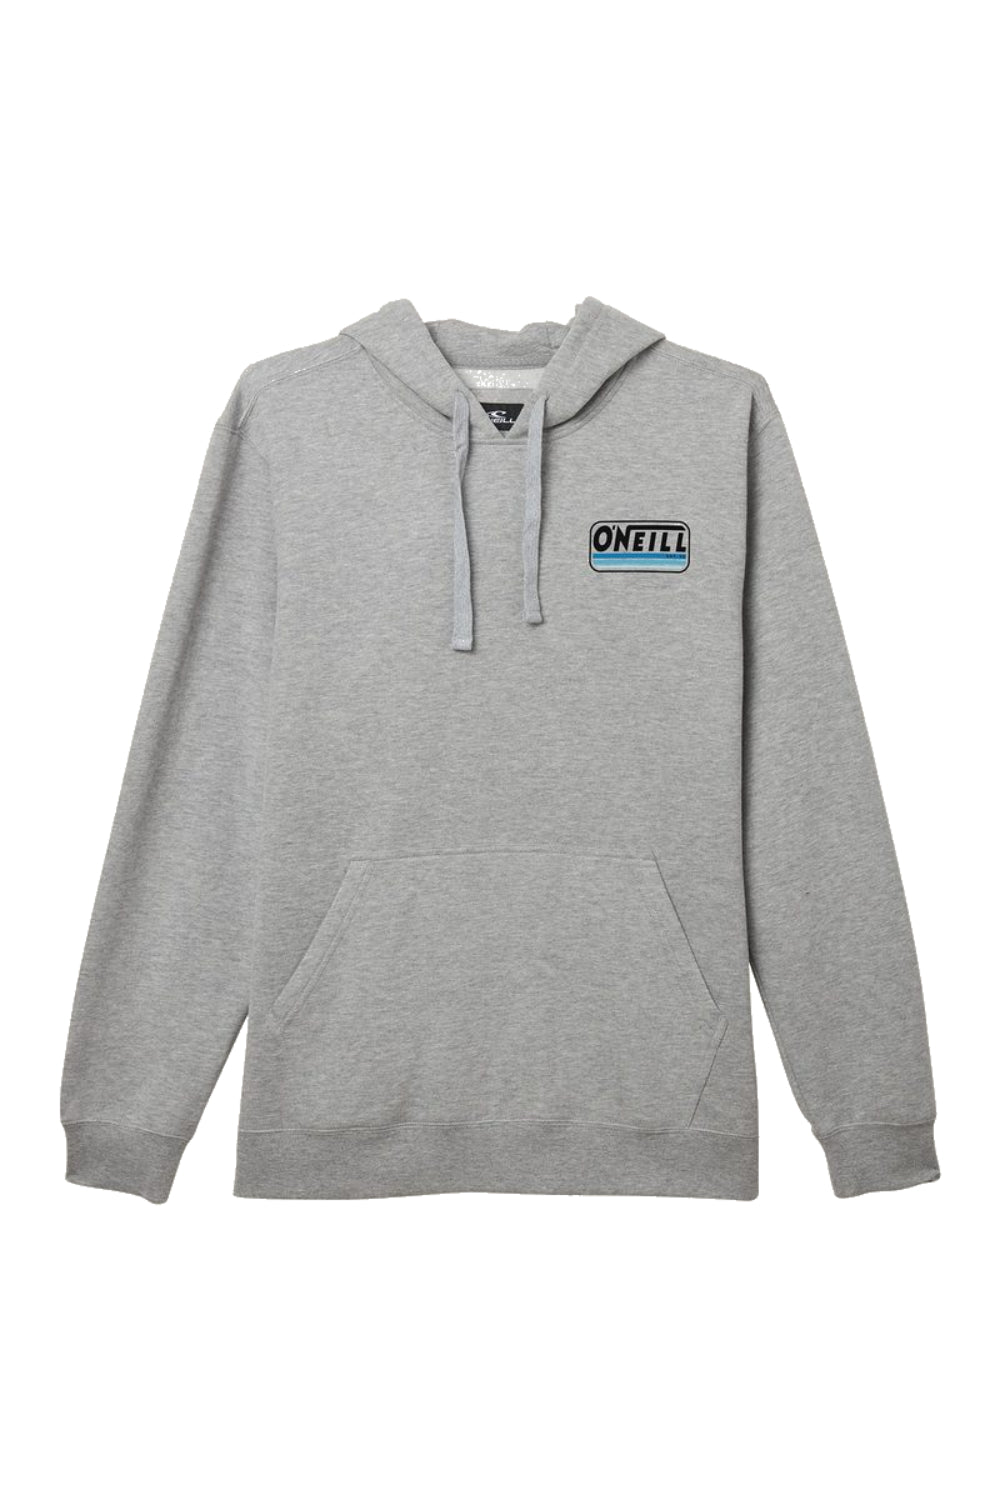 Oneill Fifty Two Pullover Fleece HGR M